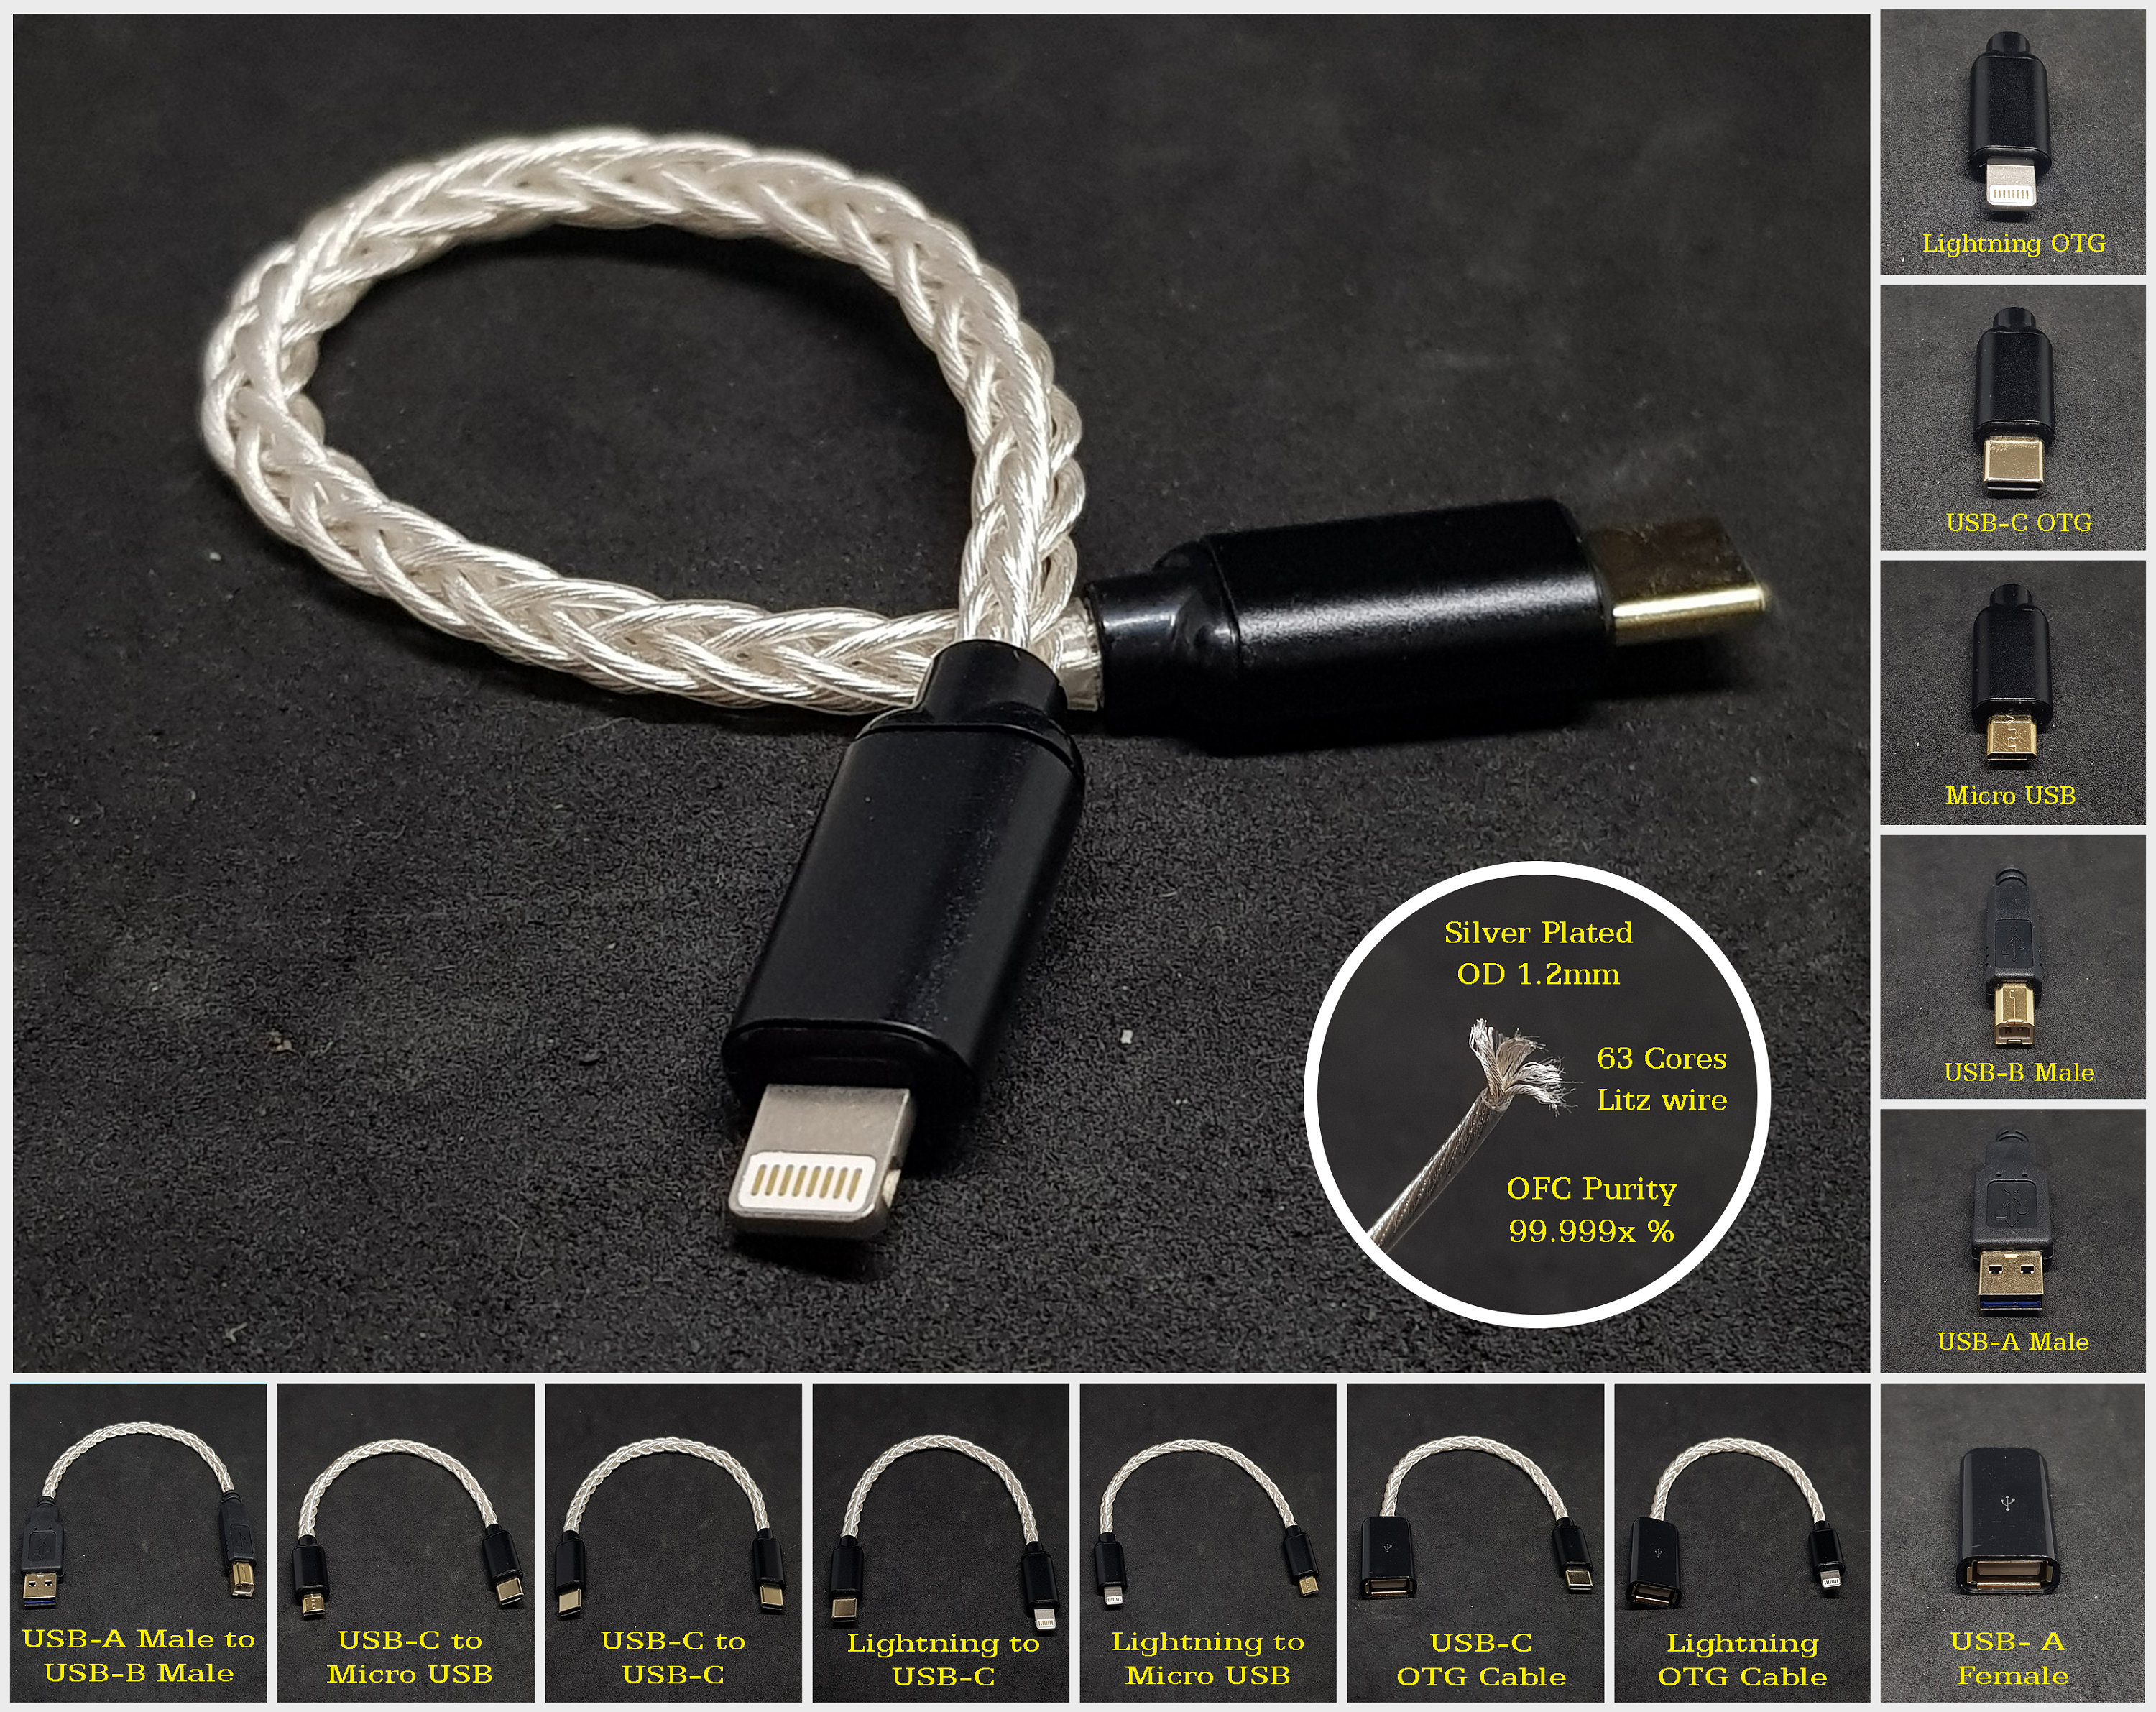 How to Make C-Type OTG Cable-Connector From Old USB Data Cable